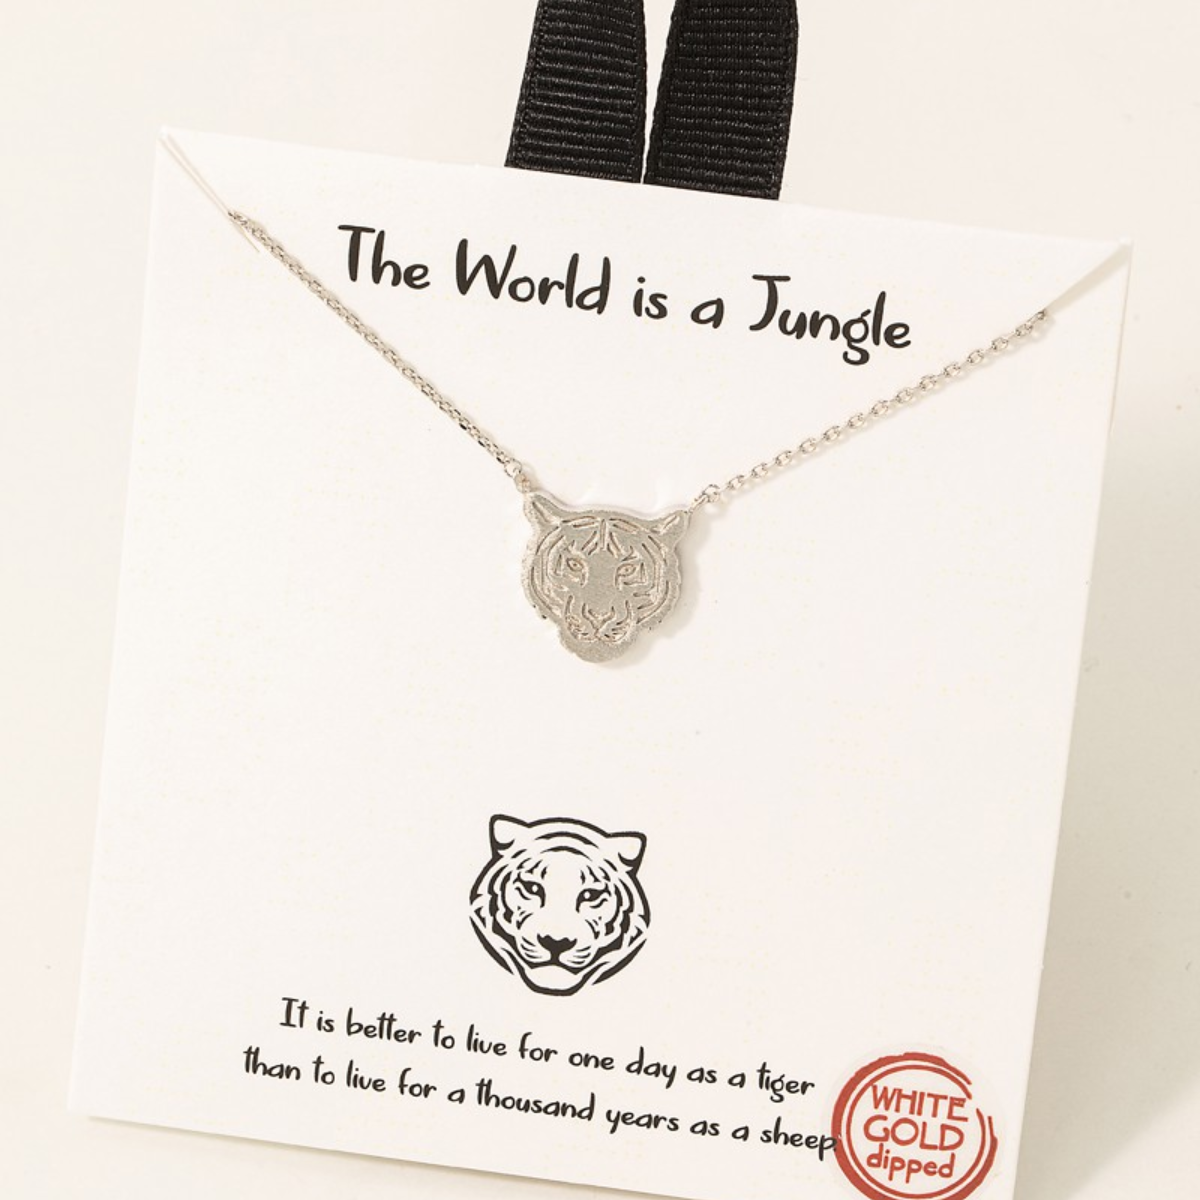 FASHION GO's Gold Dipped Tiger Head Pendant Necklace displayed on a card with the words "the world is a jungle" and a quote about living boldly.